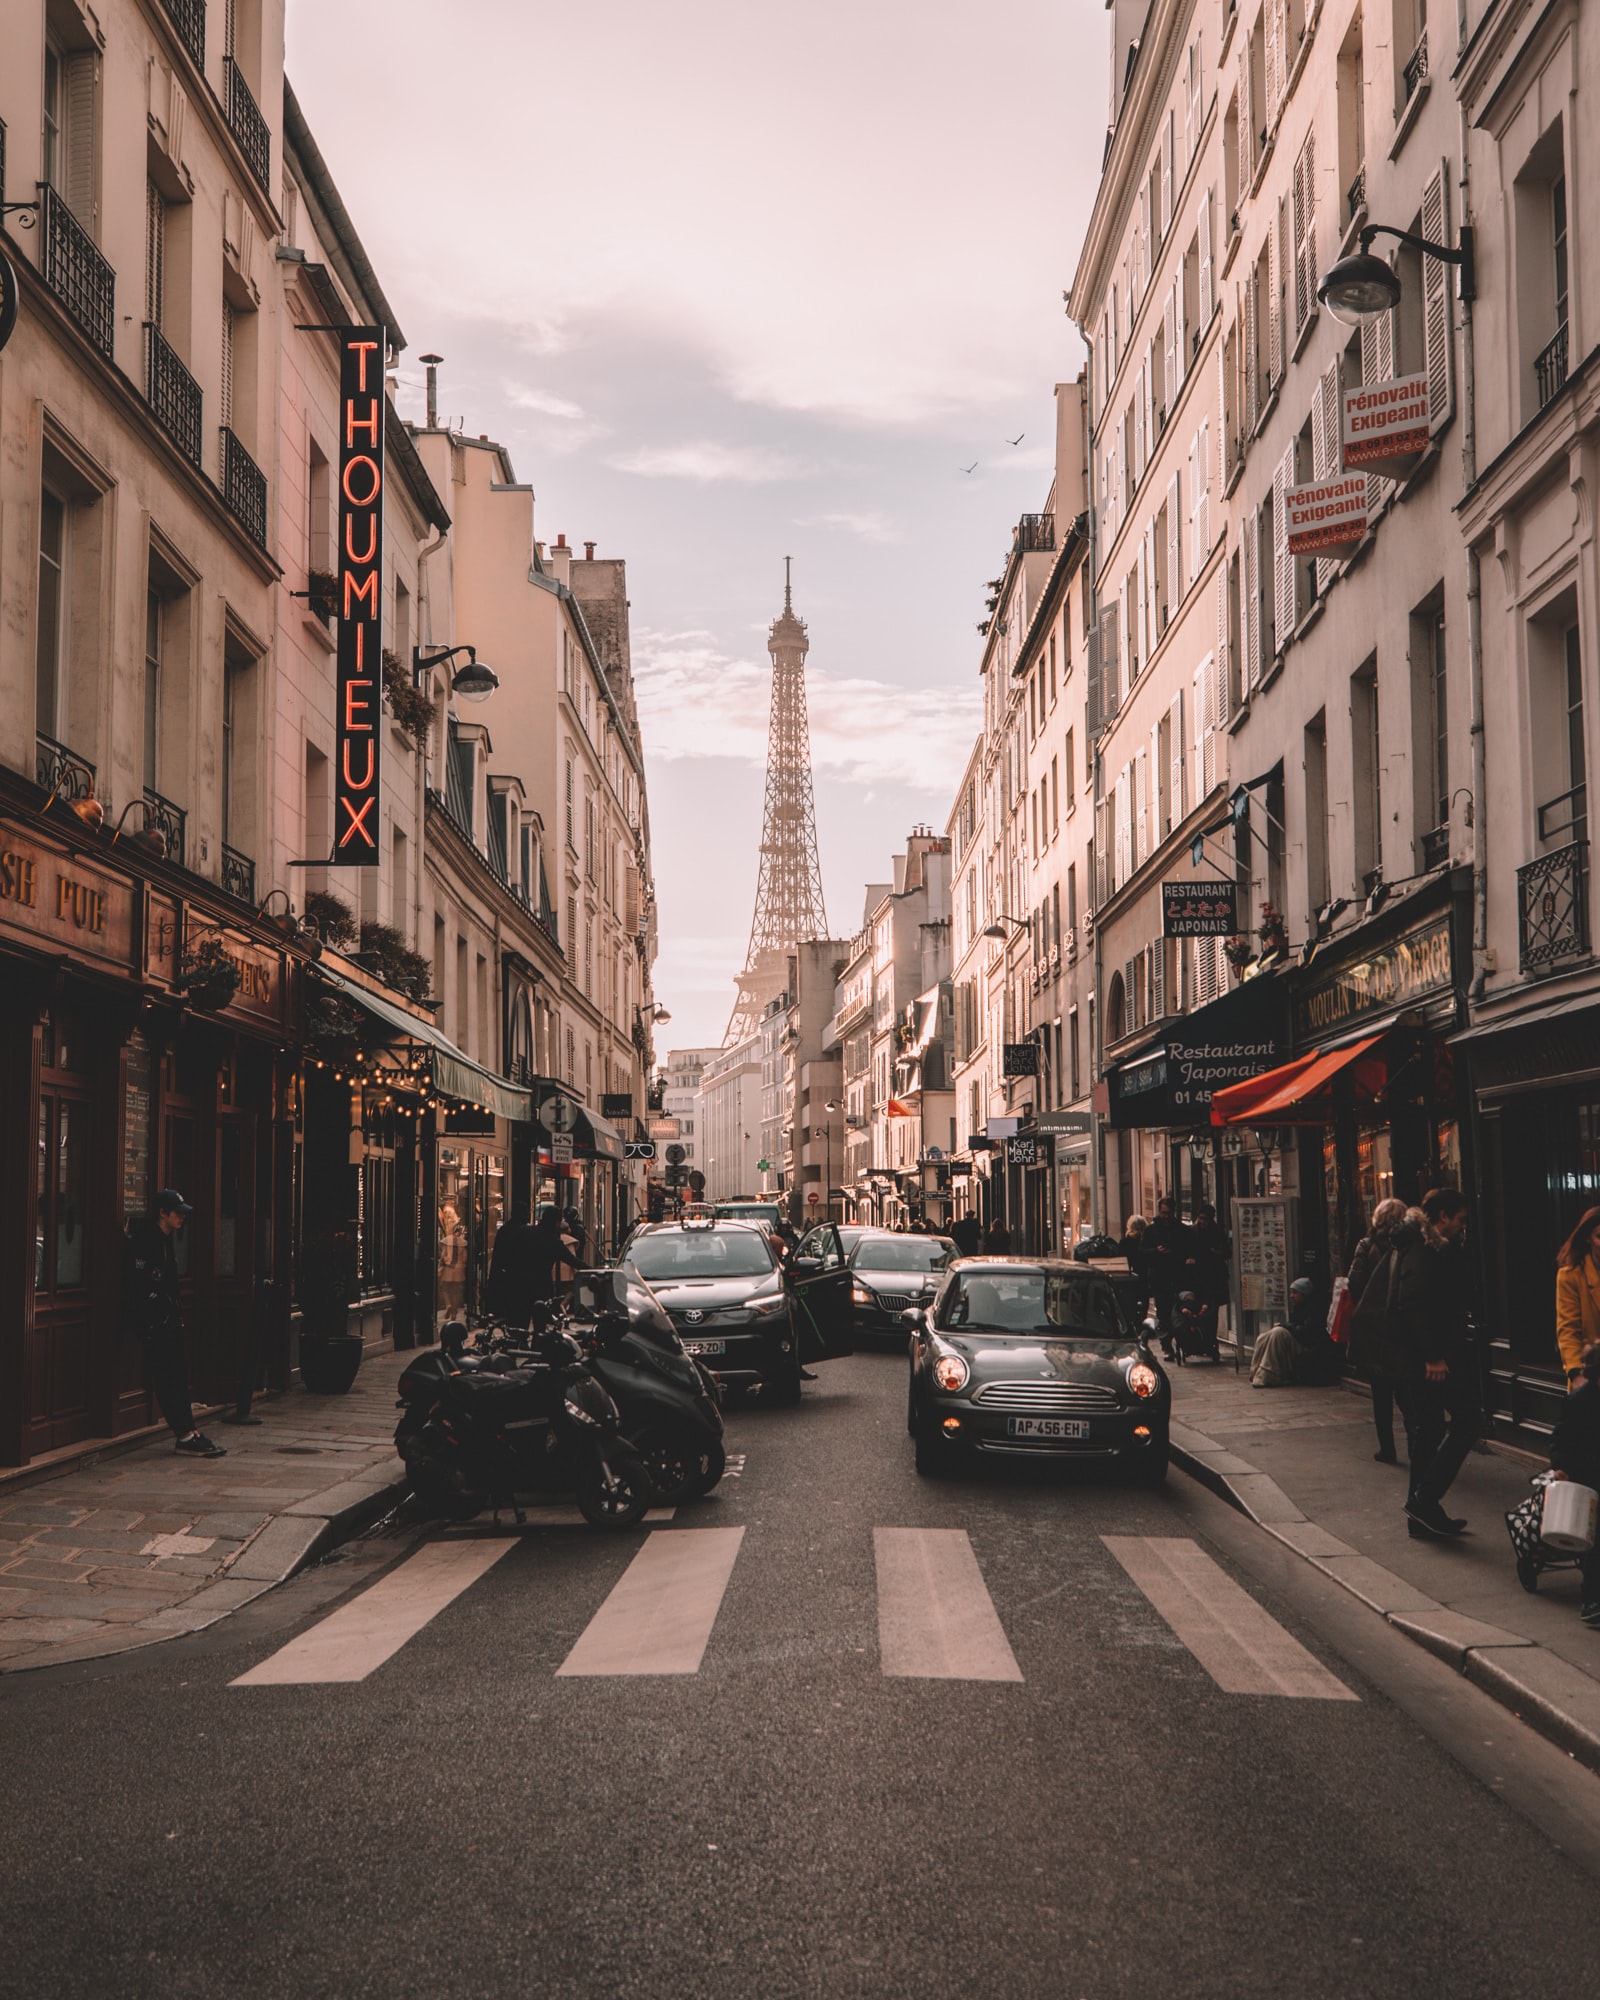 Why You Should Invest in France’s Real Estate Market In 2022